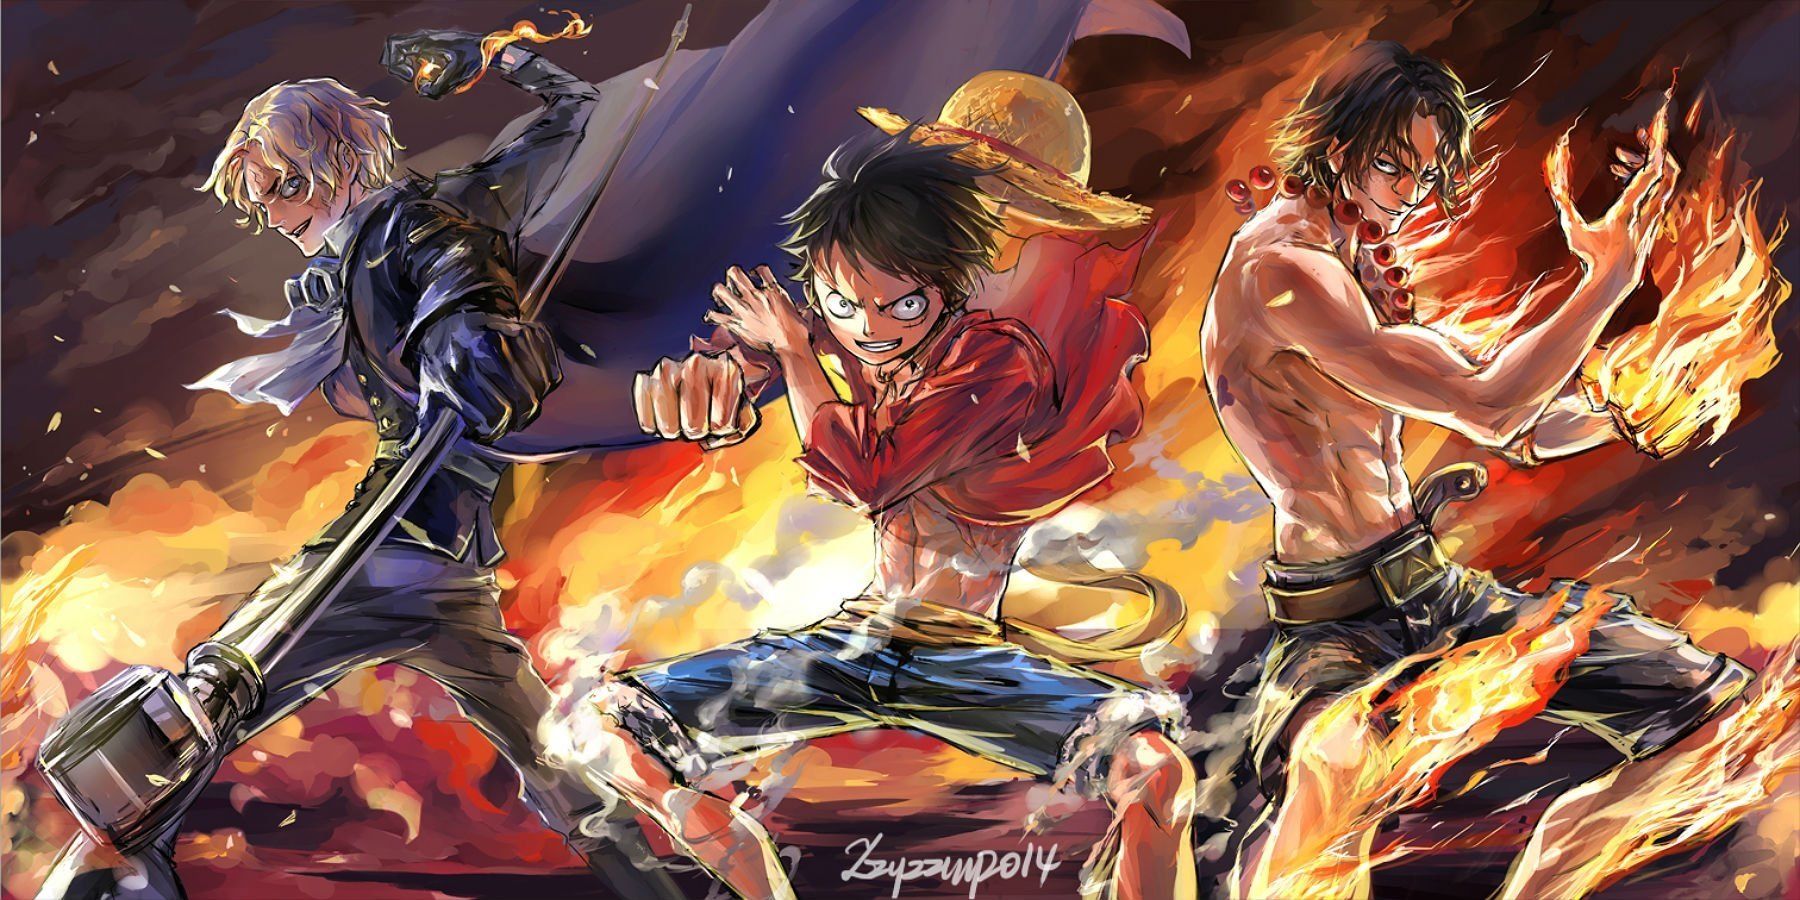 One Piece Anime Wallpapers 4k Hd One Piece Anime Backgrounds On Wallpaperbat